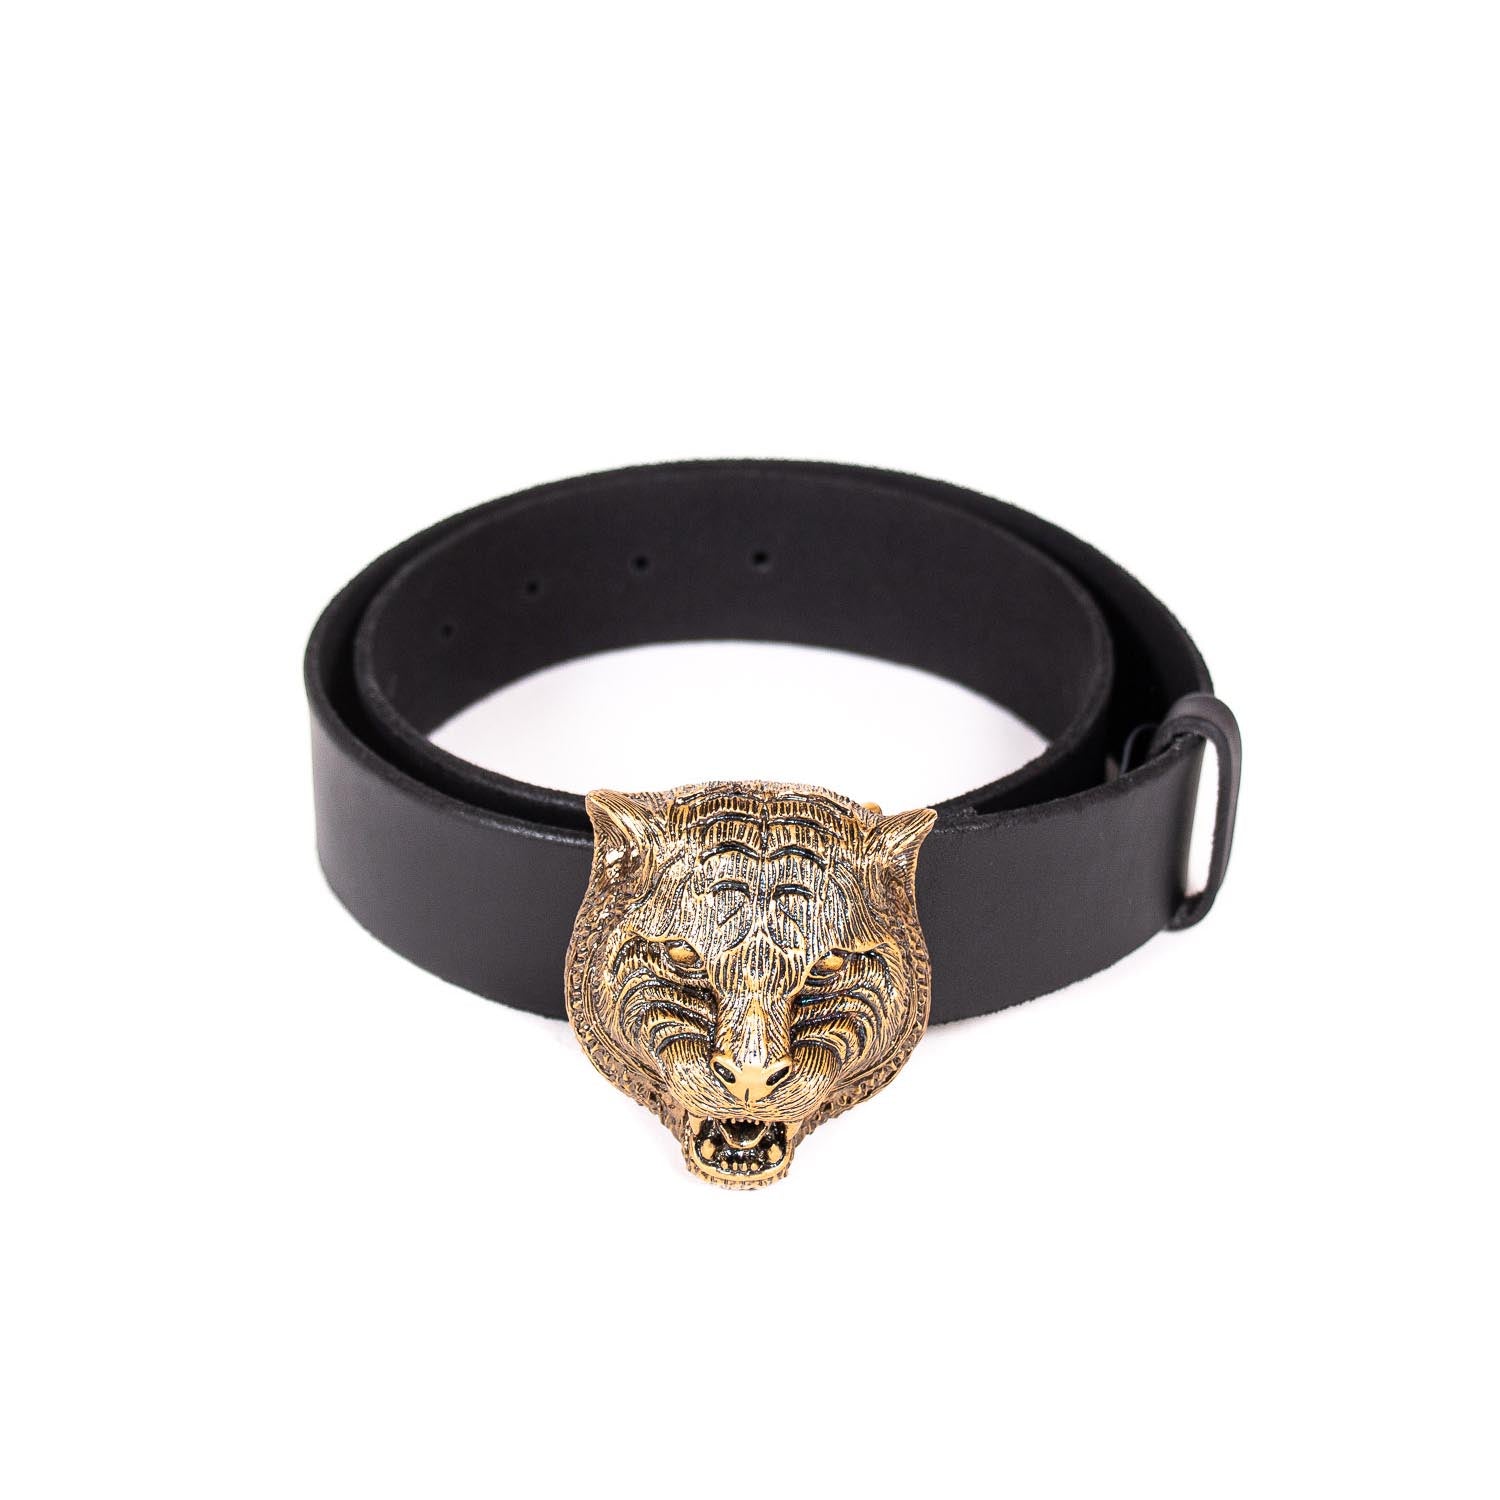 Shop authentic Gucci Tiger Head Leather Belt at revogue for just USD 435.00